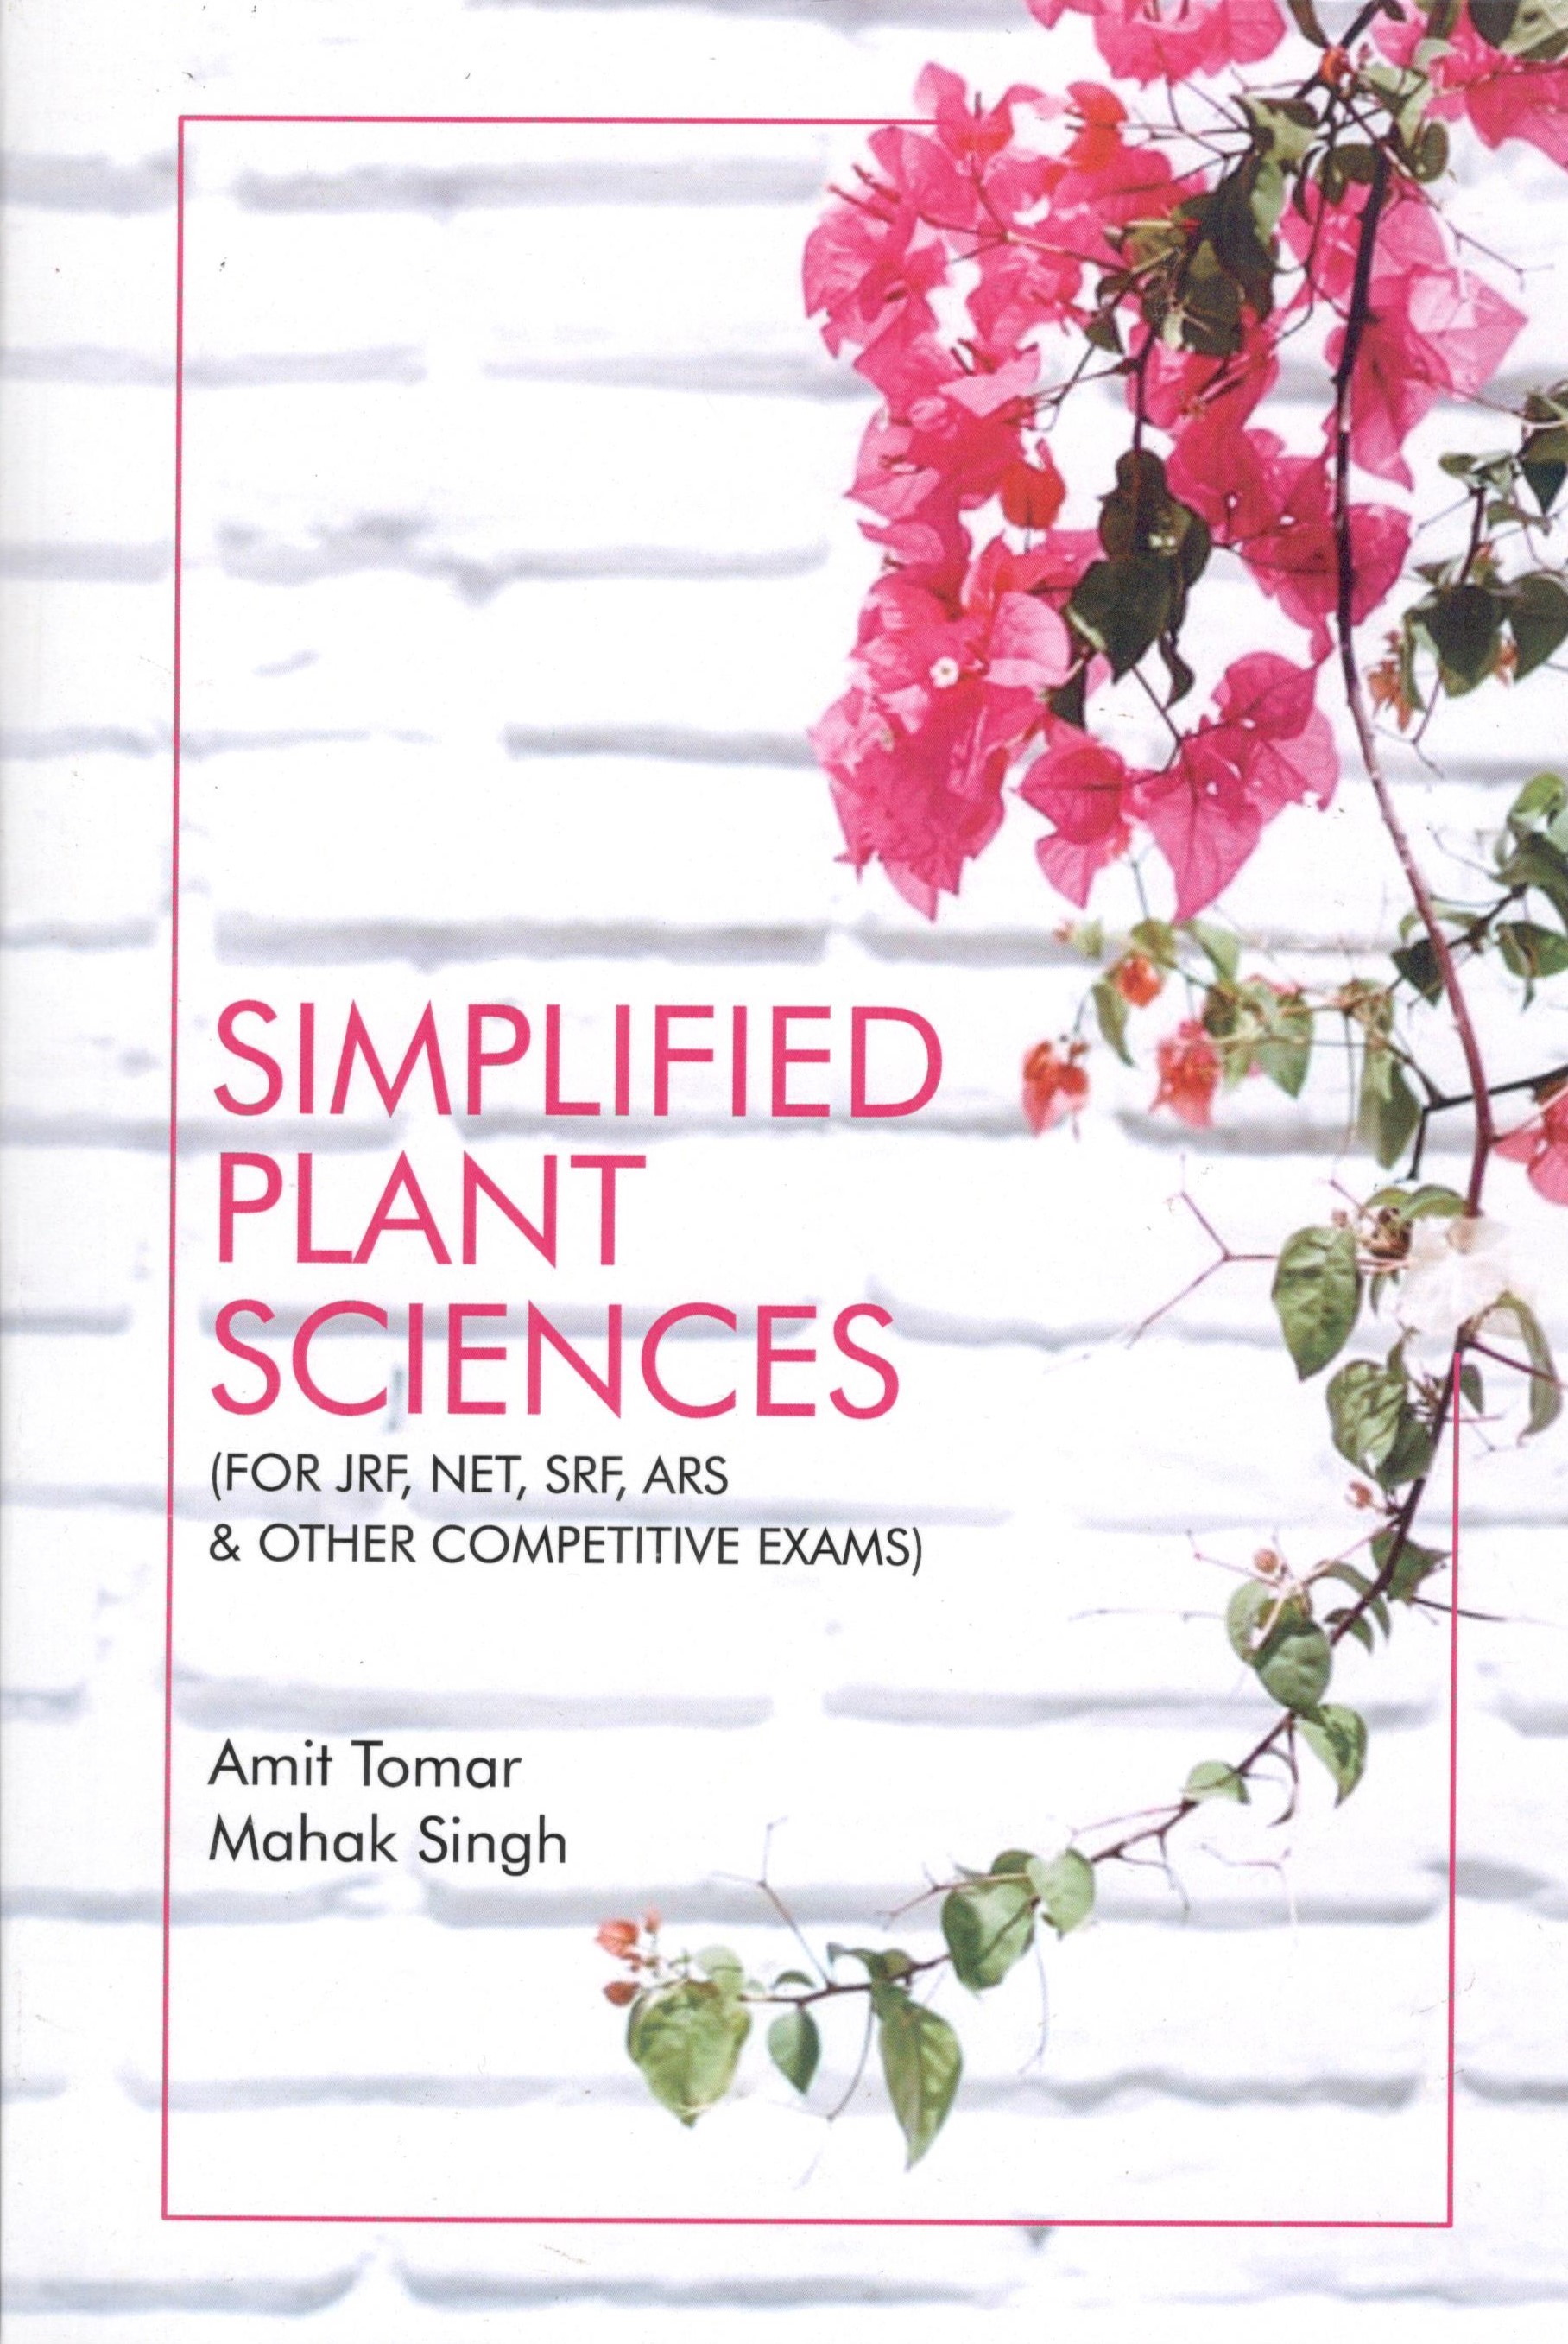 Simplified Plant Sciences (FOR JRF, NET, SRF, ARS & OTHER COMPETITIVE EXAMS)